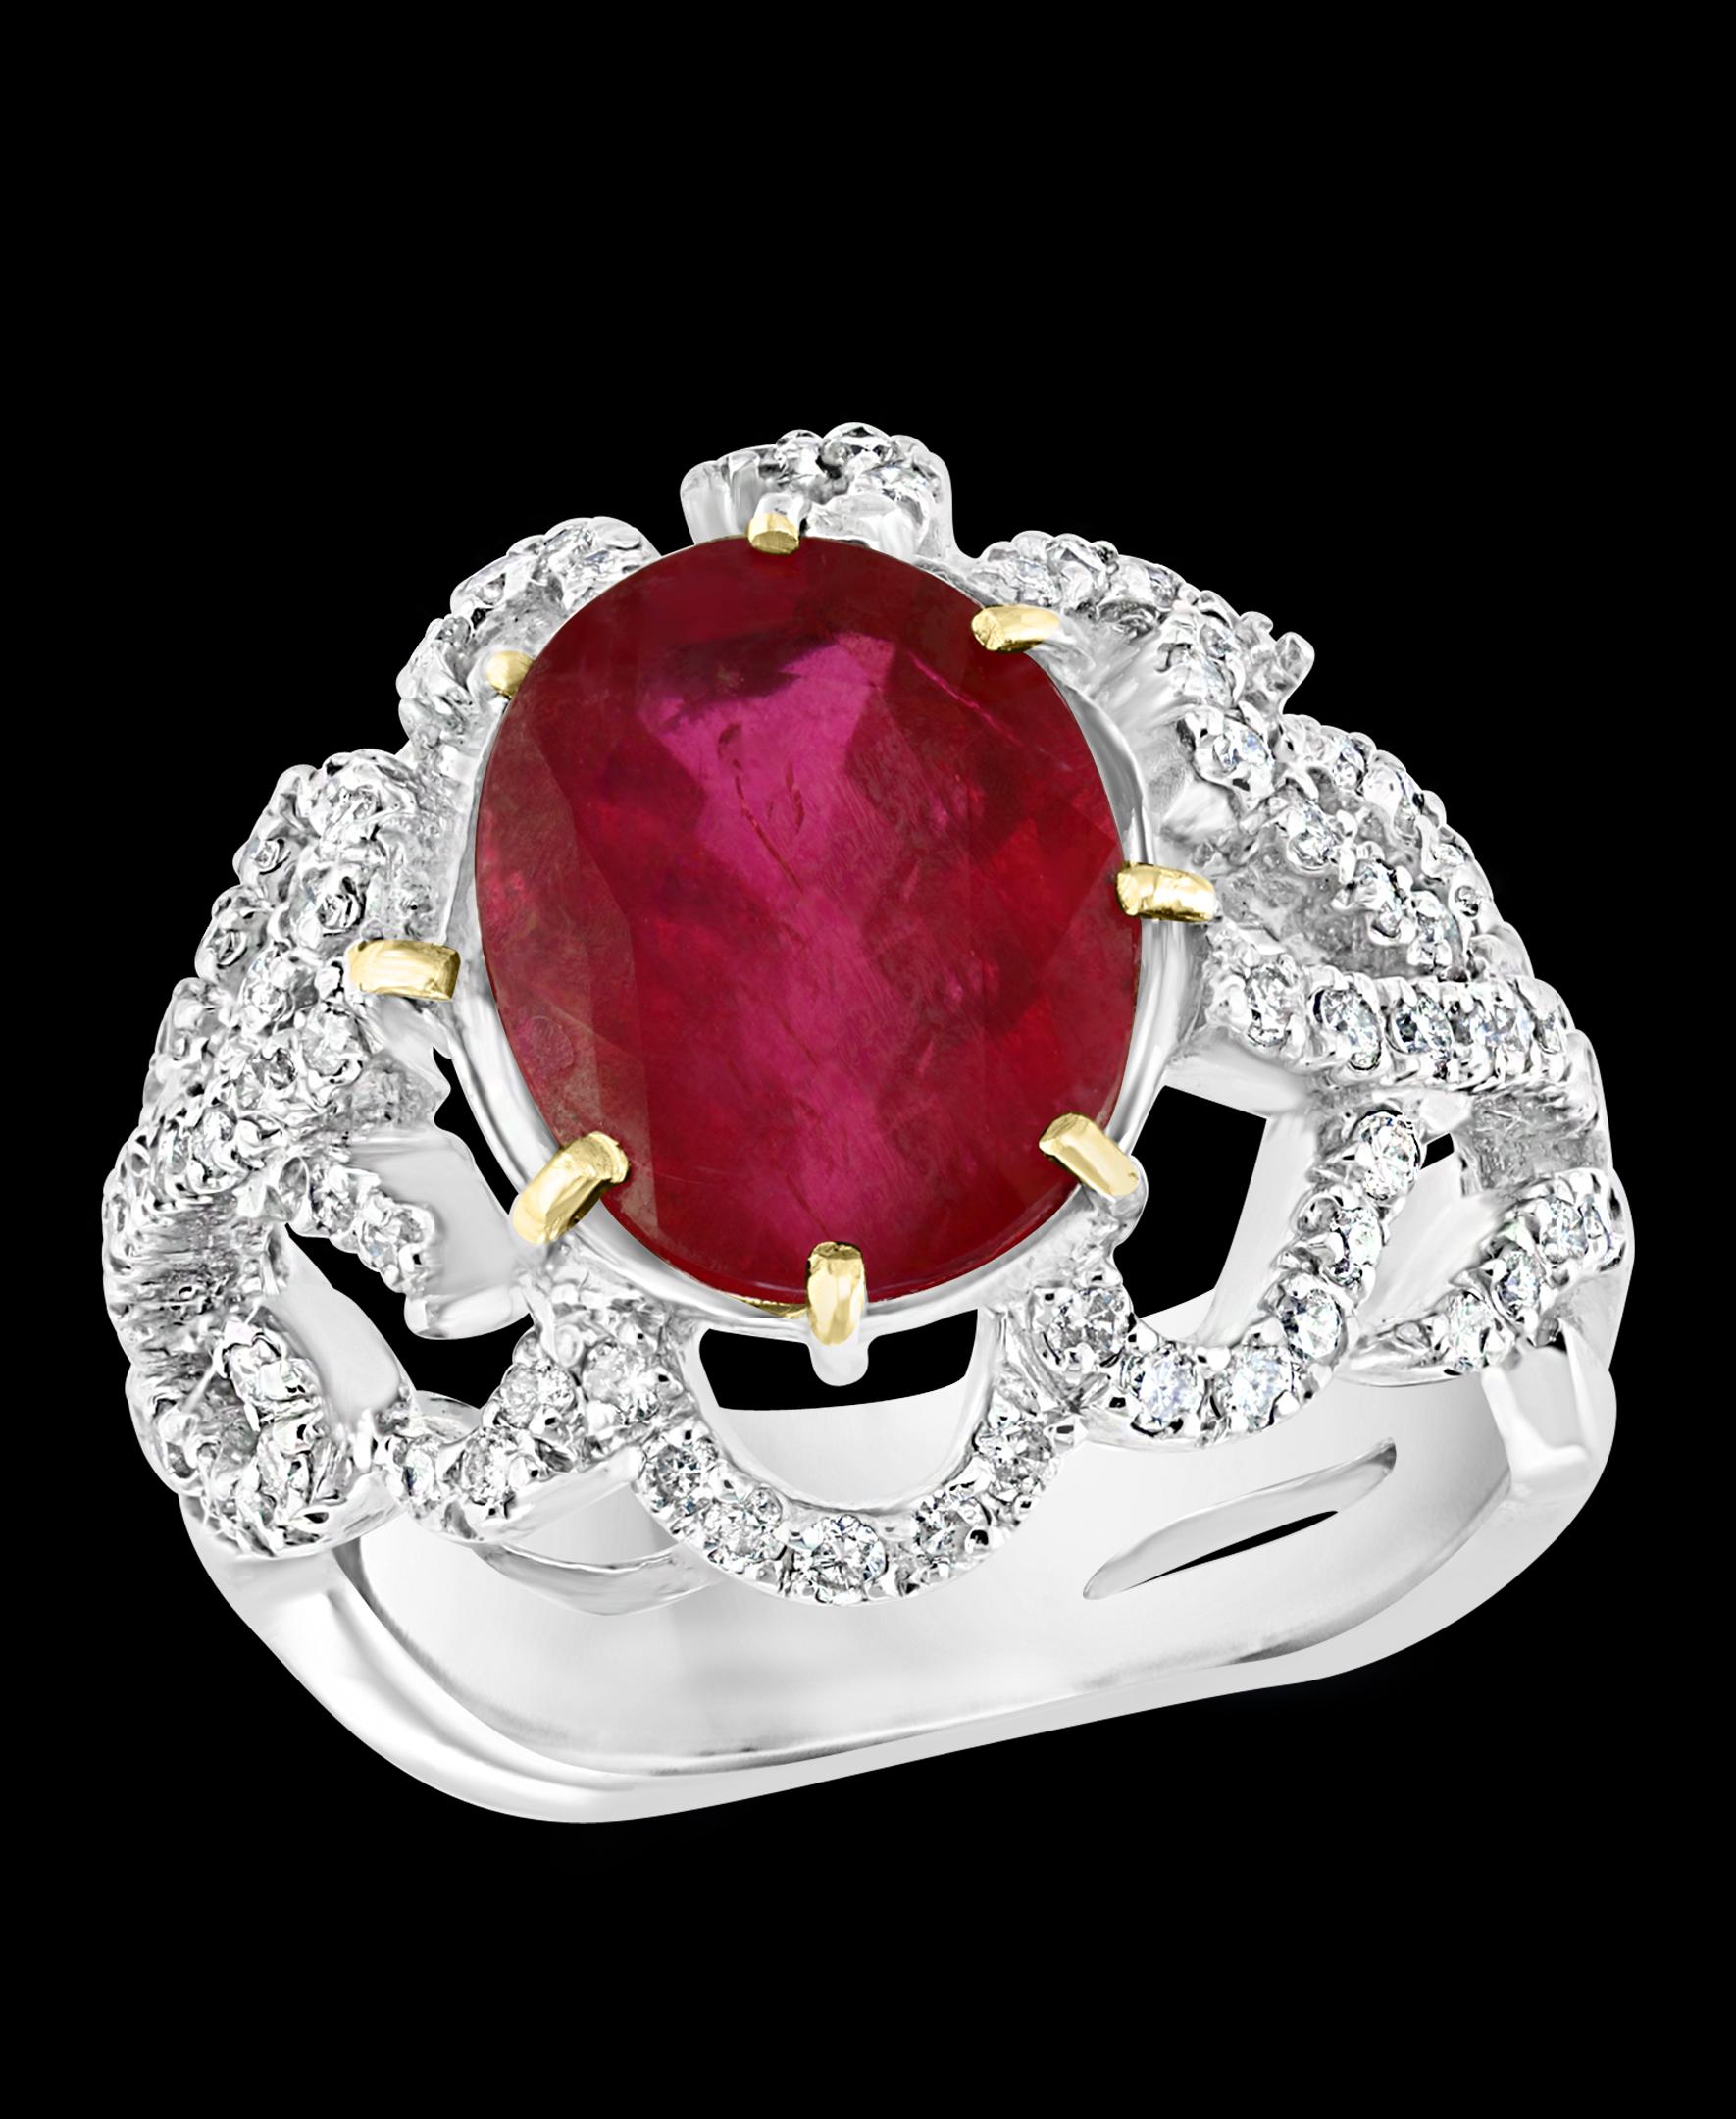 Approximately 4 Carat  Natural Ruby And Diamond 18 Karat White Gold Ring Size 5
 prong set
18 K White Gold: 10  gram
Stamped 750
Ring Size 5 ( can be altered for no charge )
Large 4 carat oval shape ruby Natural Stone surrounded by brilliant cut